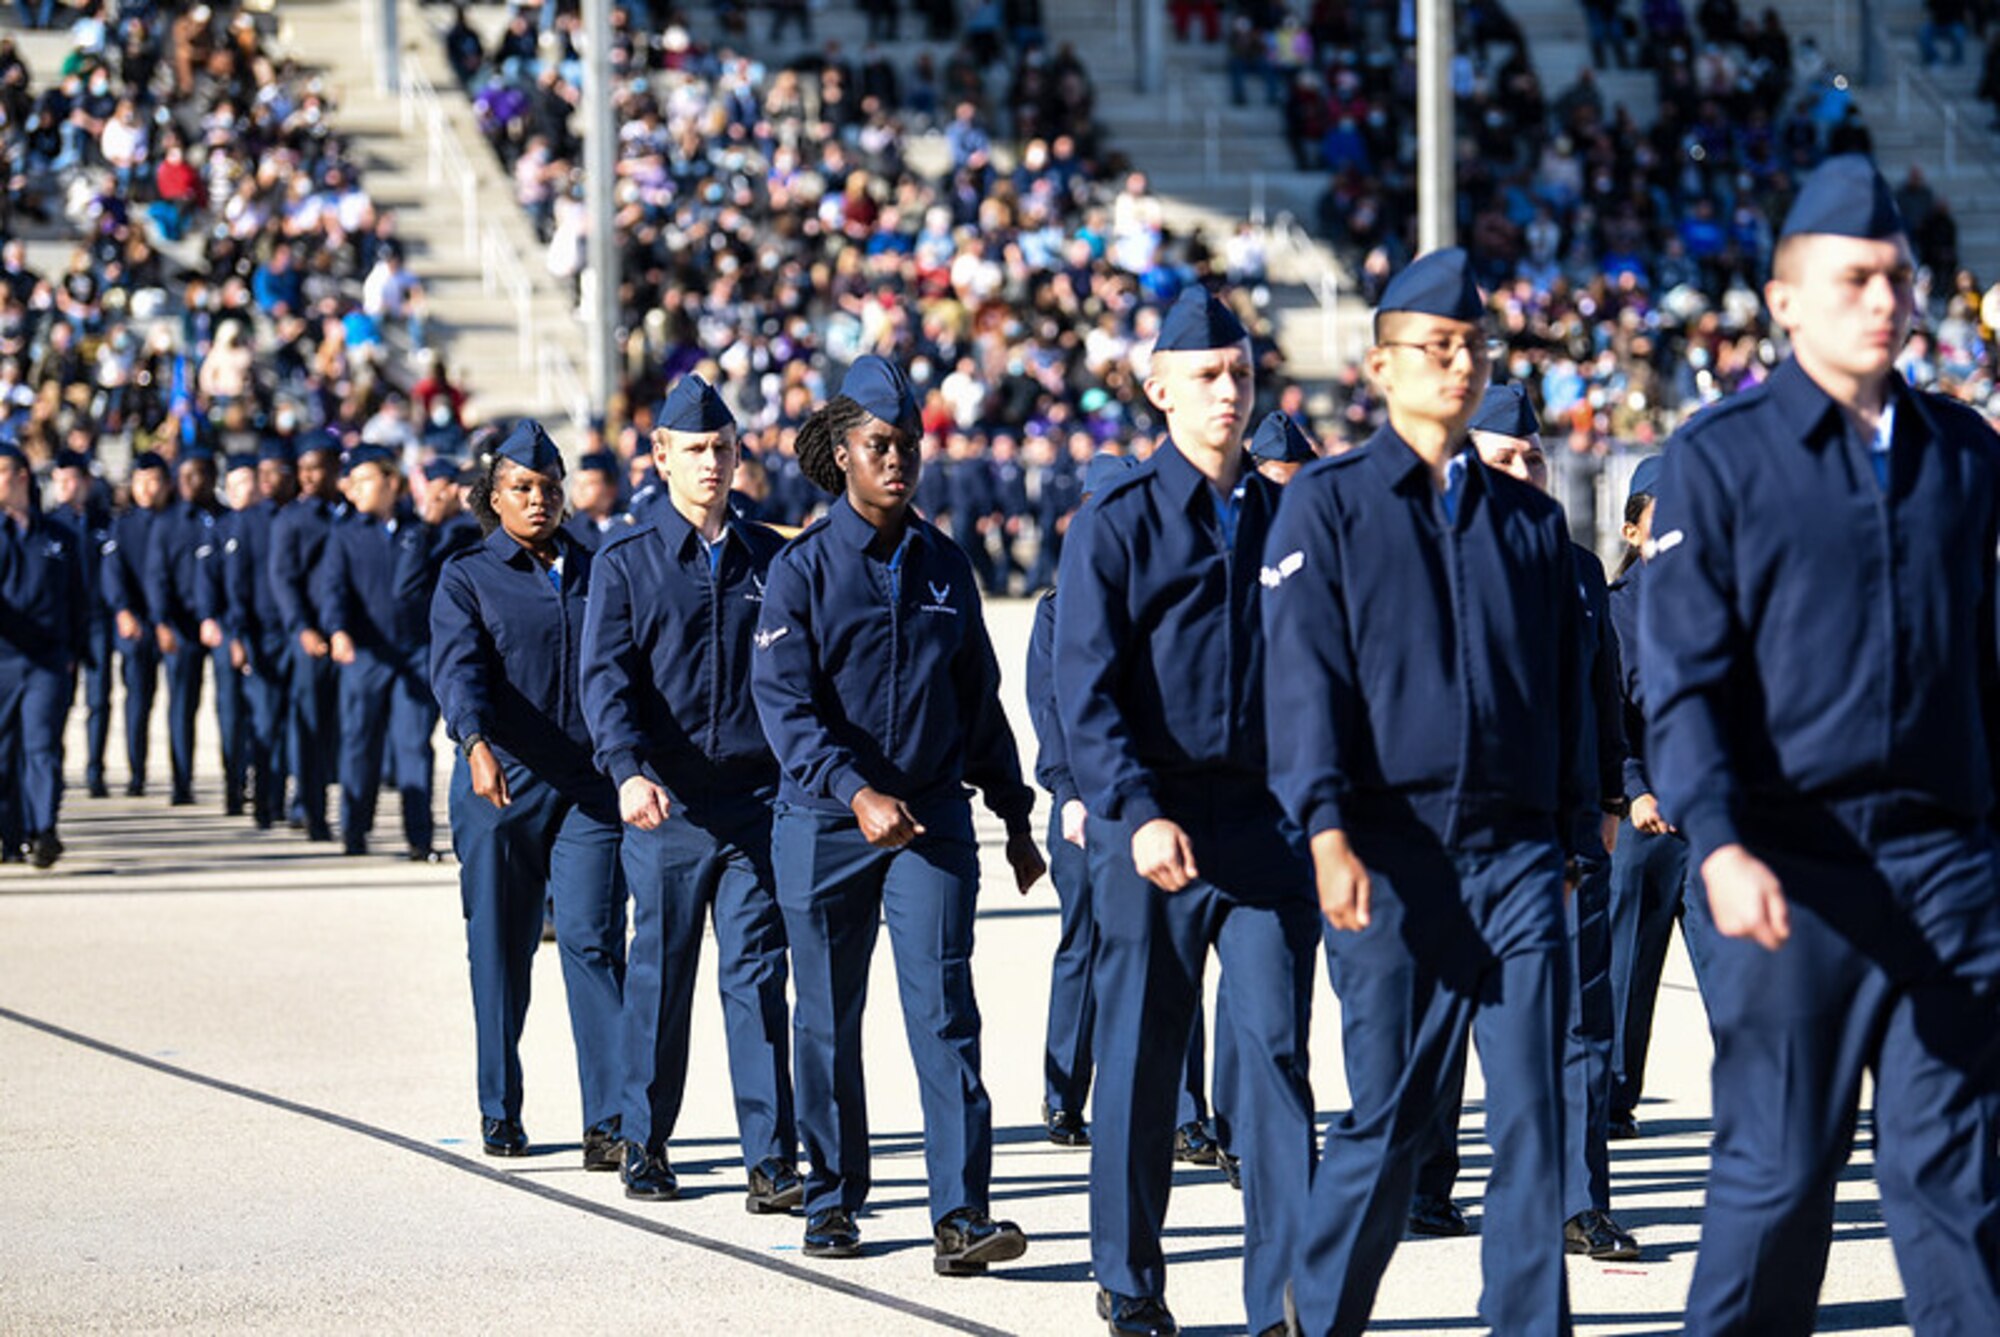 BMT trainees march during their graduation parade.